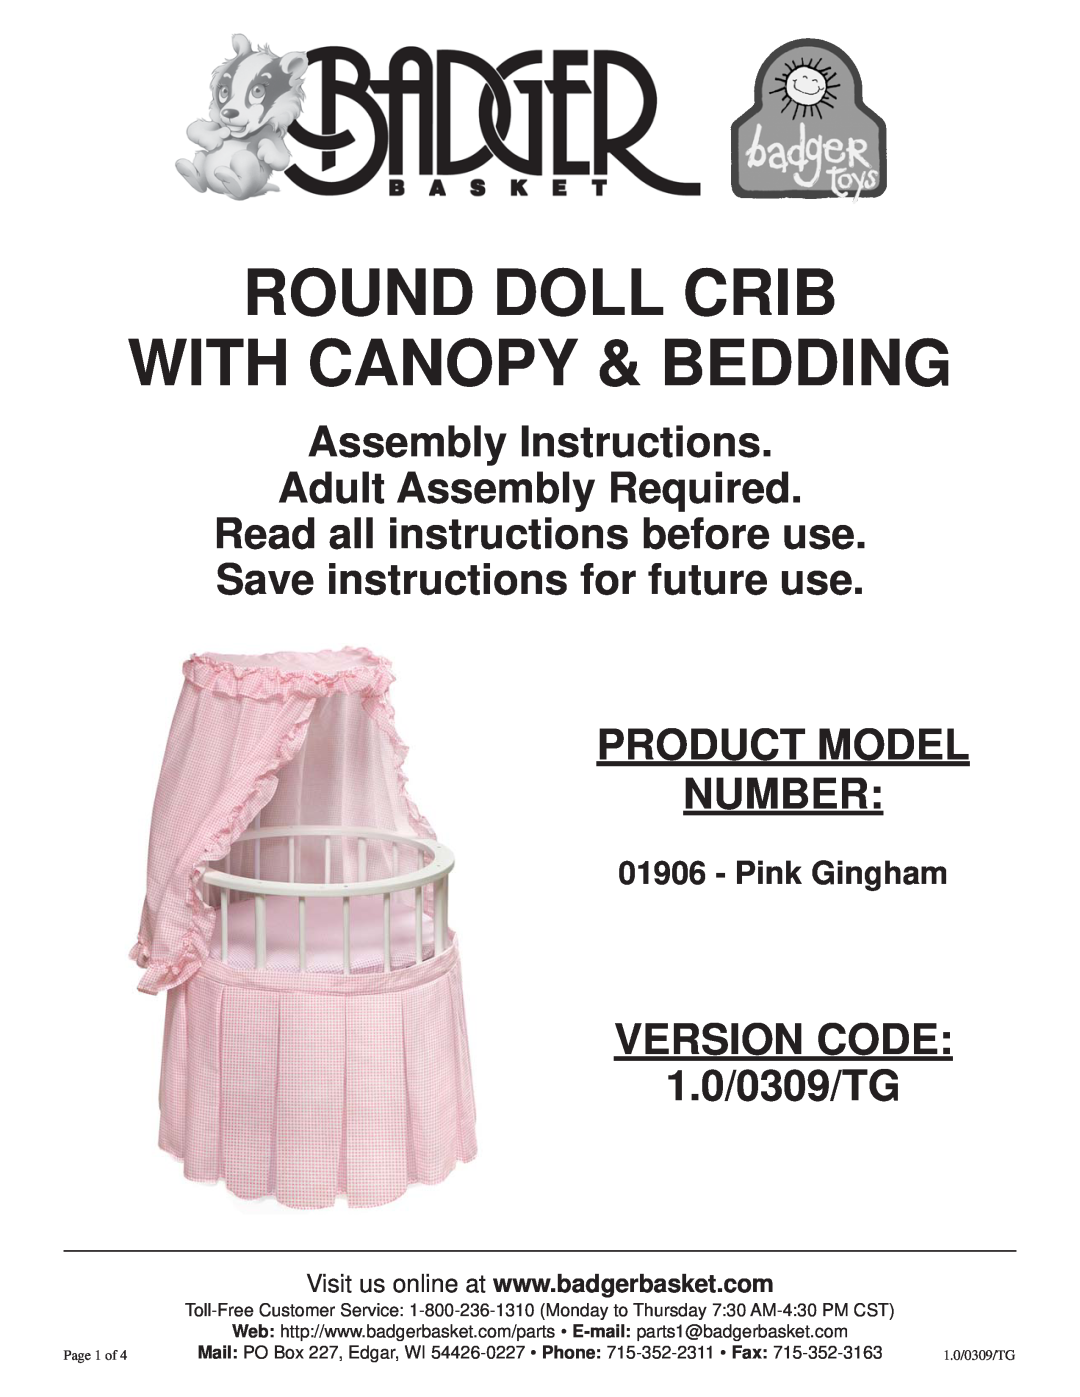 Badger Basket 01906 manual Pink Gingham, Round Doll Crib With Canopy & Bedding, Product Model Number, Page 1 of 